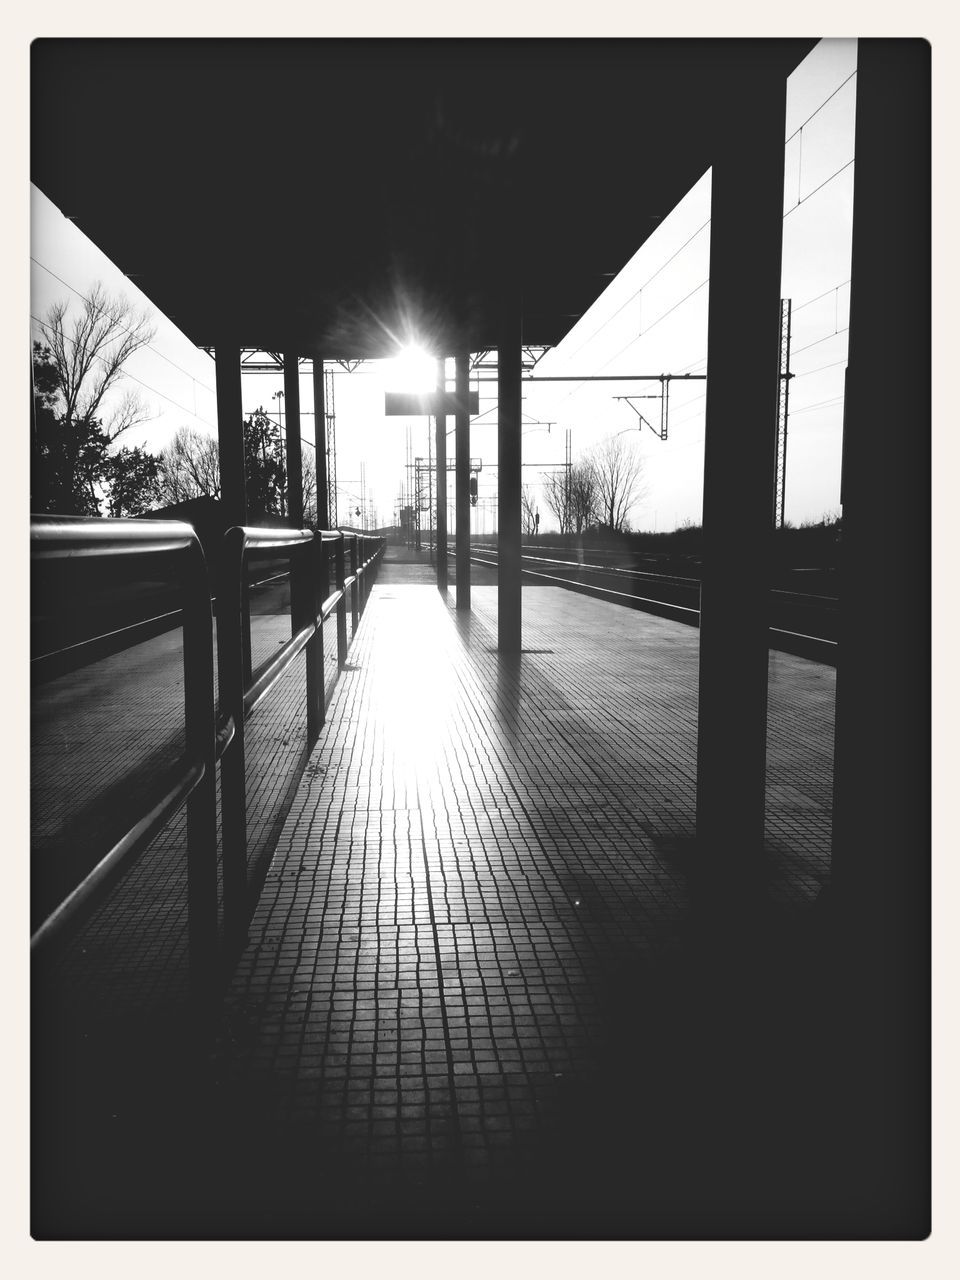 transfer print, auto post production filter, built structure, sunlight, architecture, indoors, railing, the way forward, empty, sun, sunset, absence, walkway, narrow, shadow, water, sunbeam, no people, long, dark